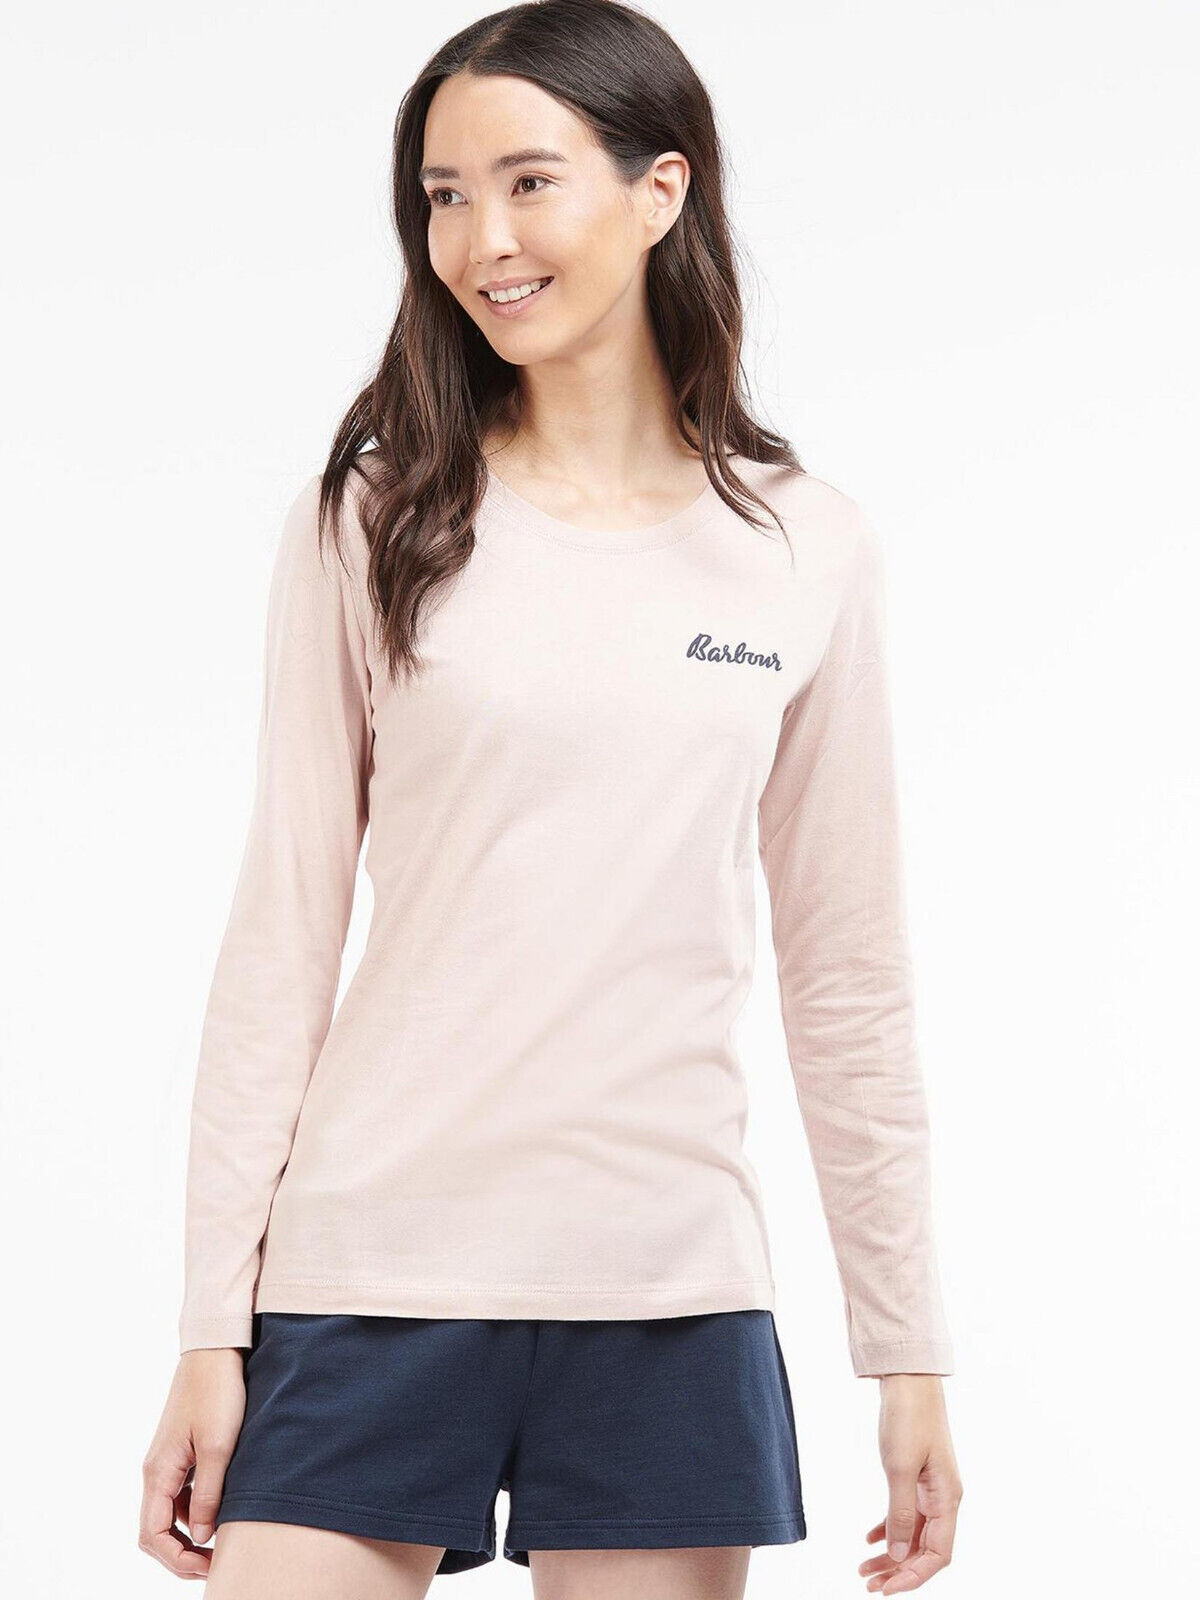 Barbour Edie Long Sleeve Lounge Top - Light Pink. UK XS. ****V471